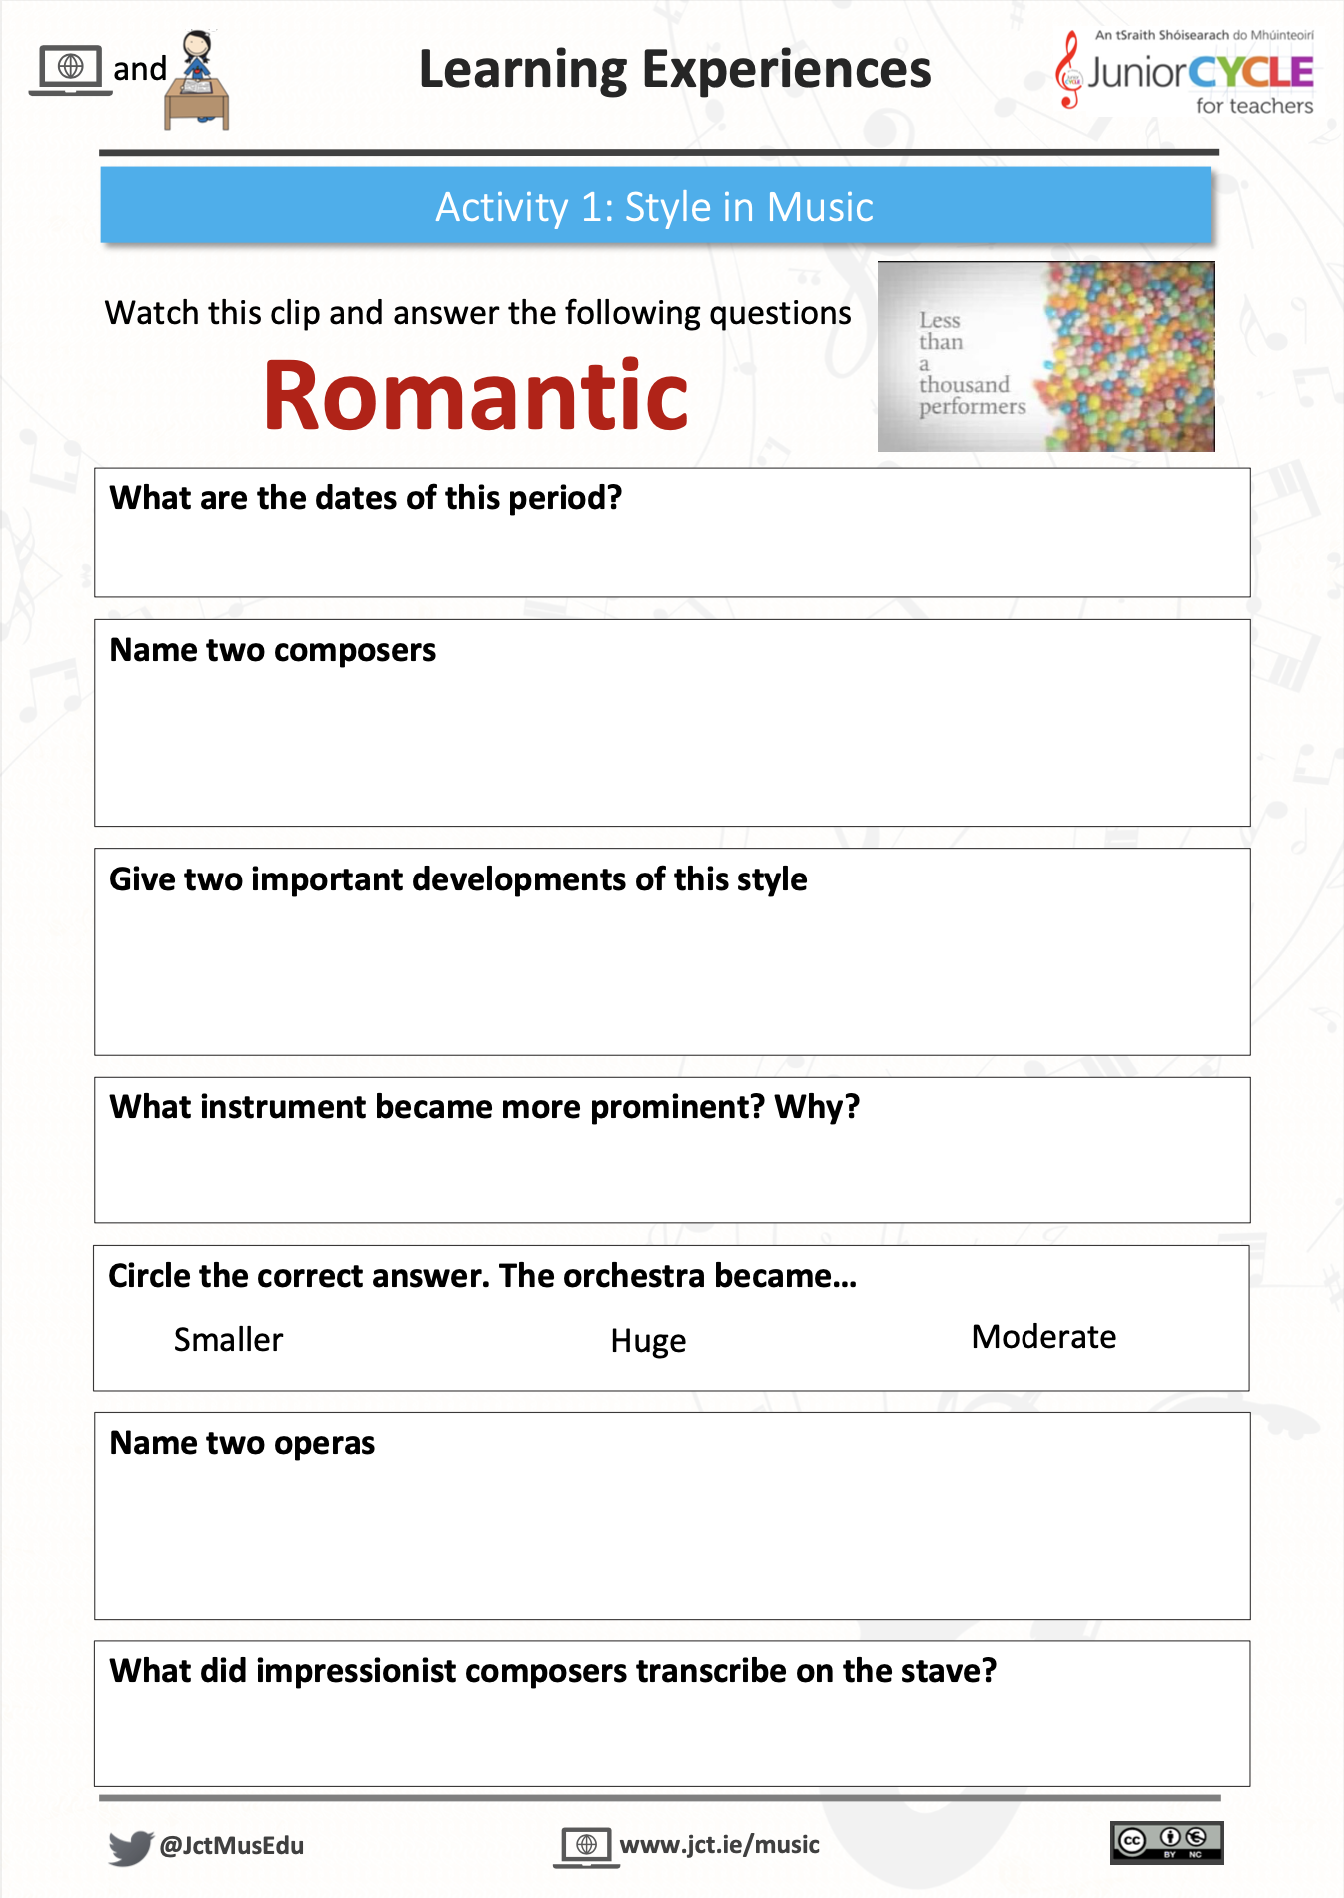 Online Learning Style - Activity 1 PDF